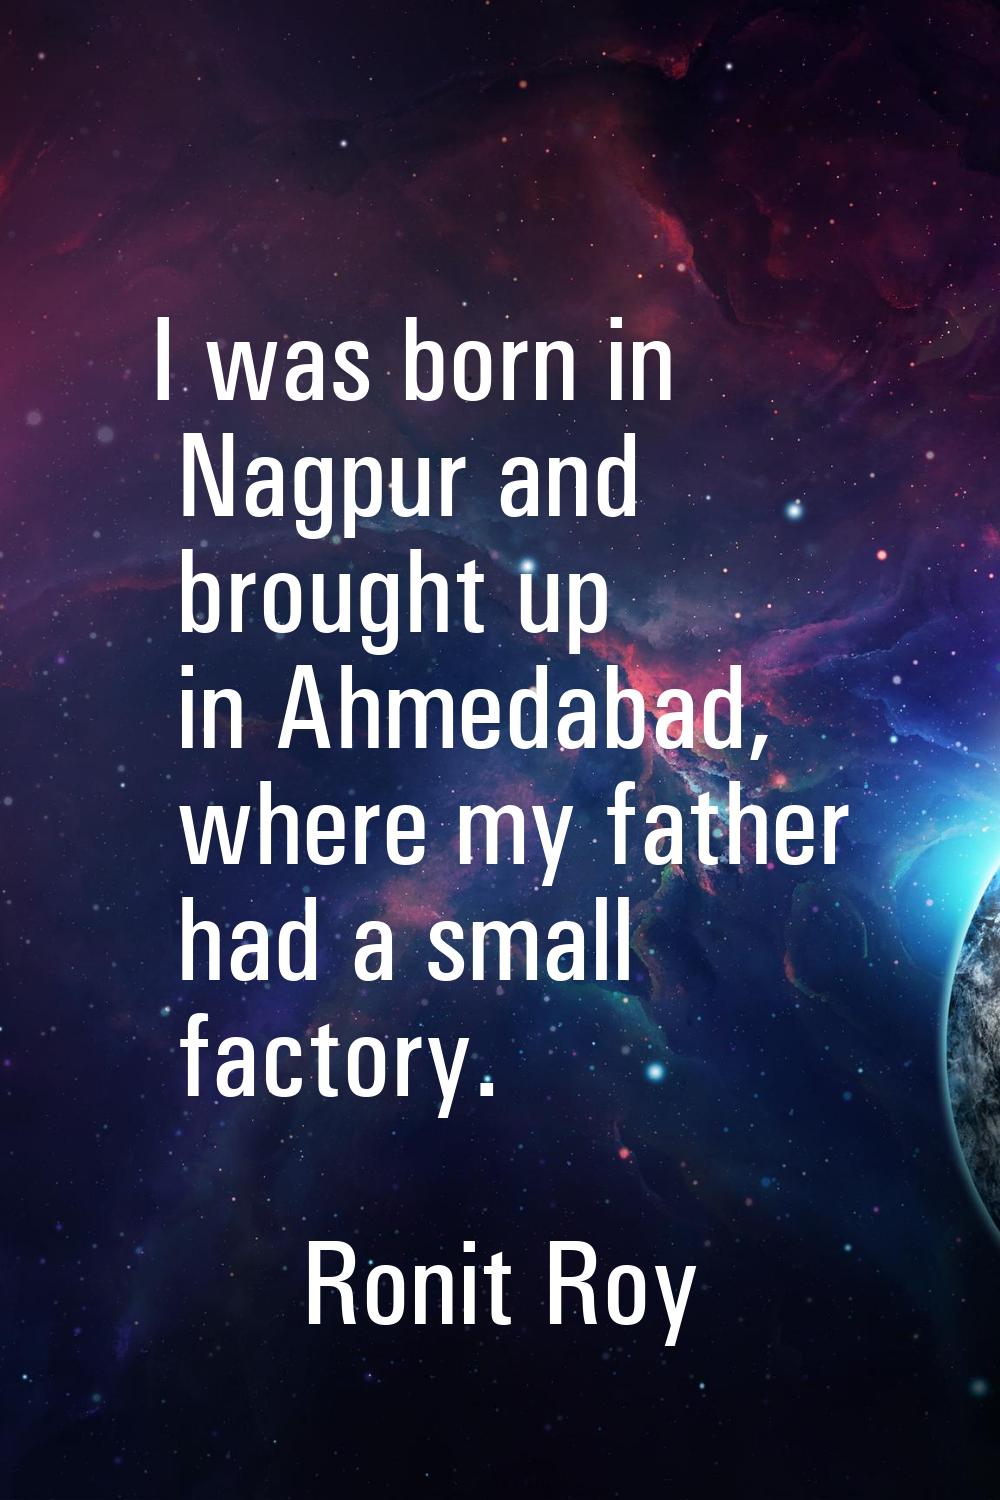 I was born in Nagpur and brought up in Ahmedabad, where my father had a small factory.